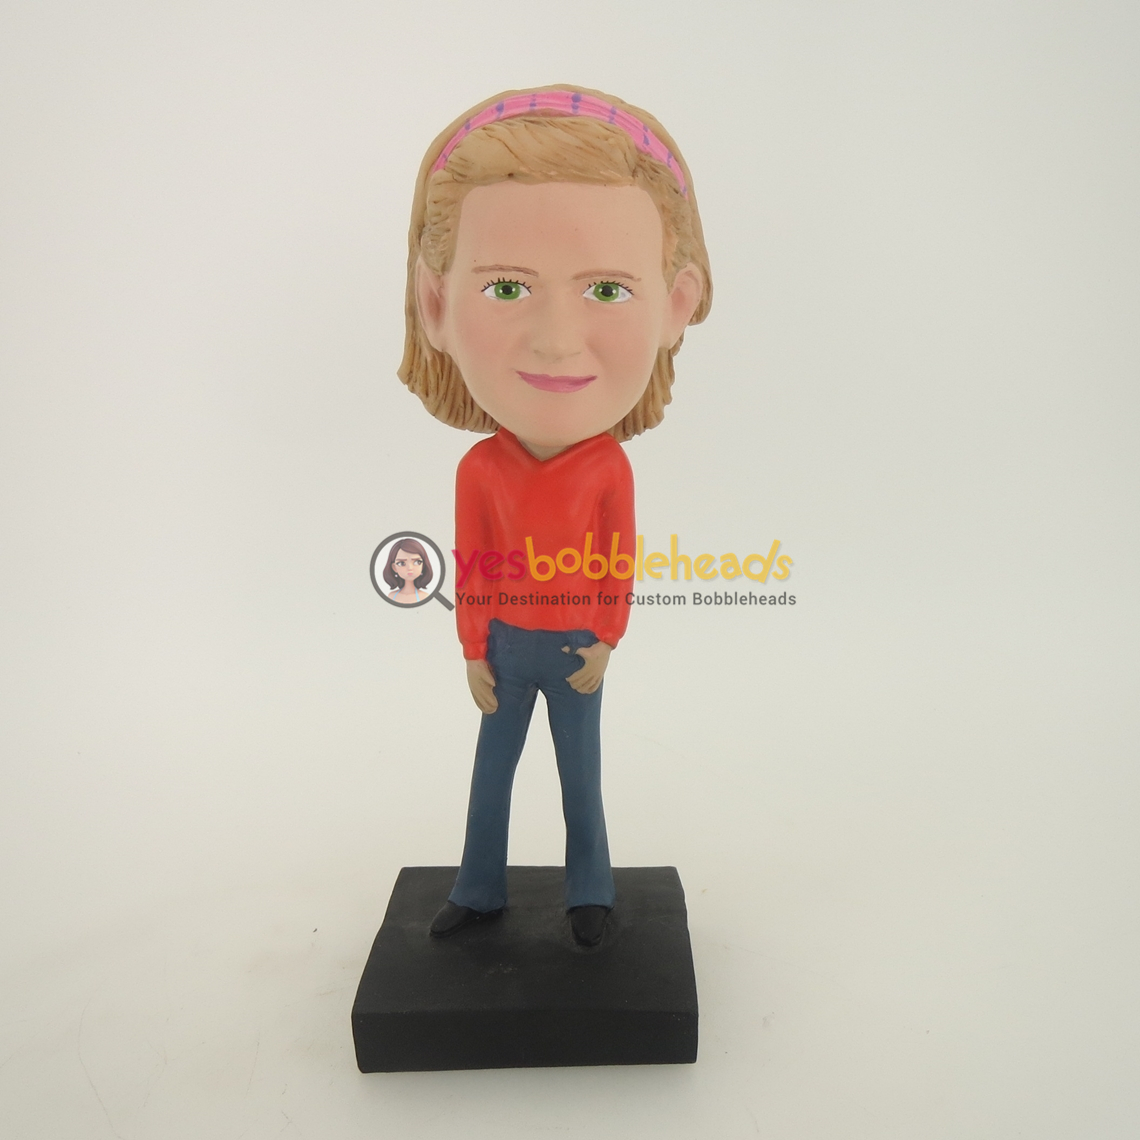 Picture of Custom Bobblehead Doll: Girl In Orange Dress And Blue Jeans